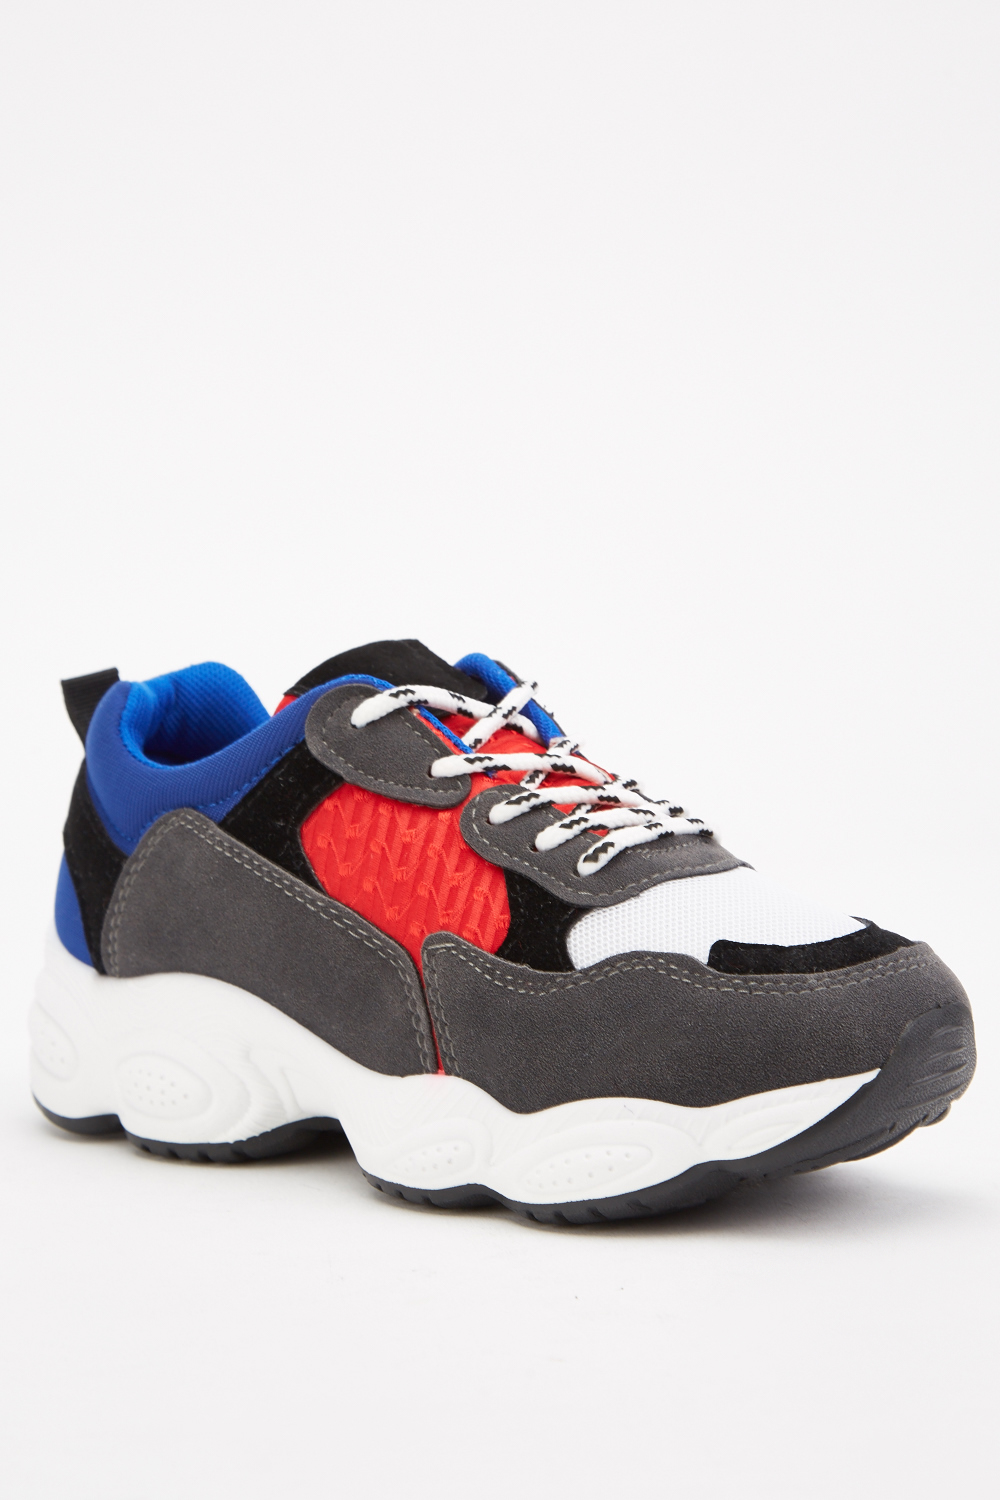 Colour Block Contrast Trainers - Just $7